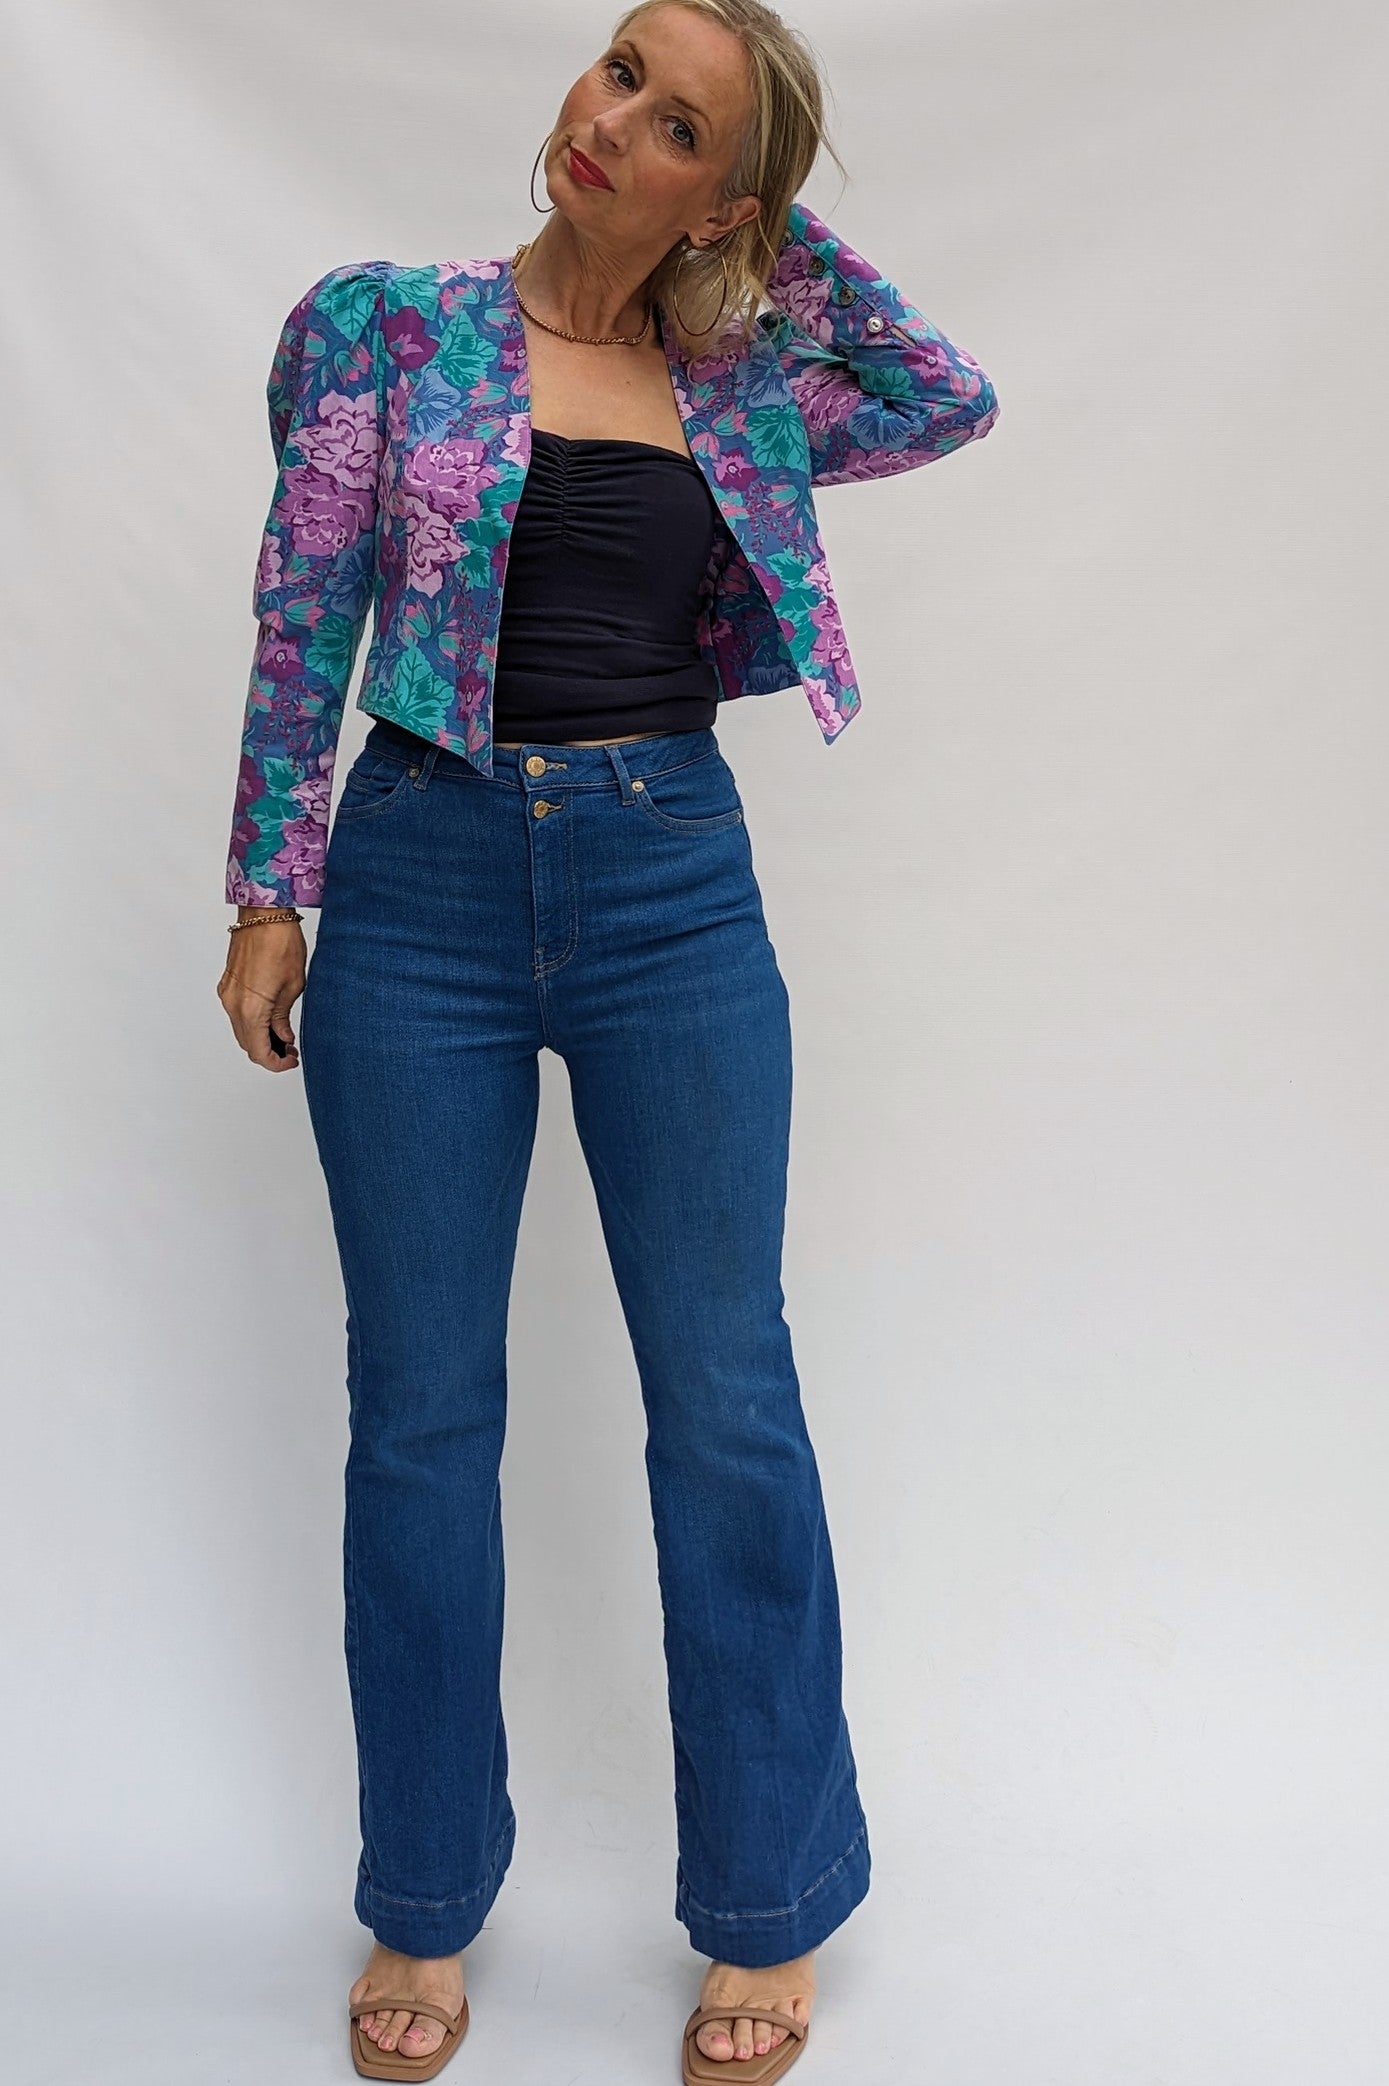 Floral Laura Ashley Cropped jacket